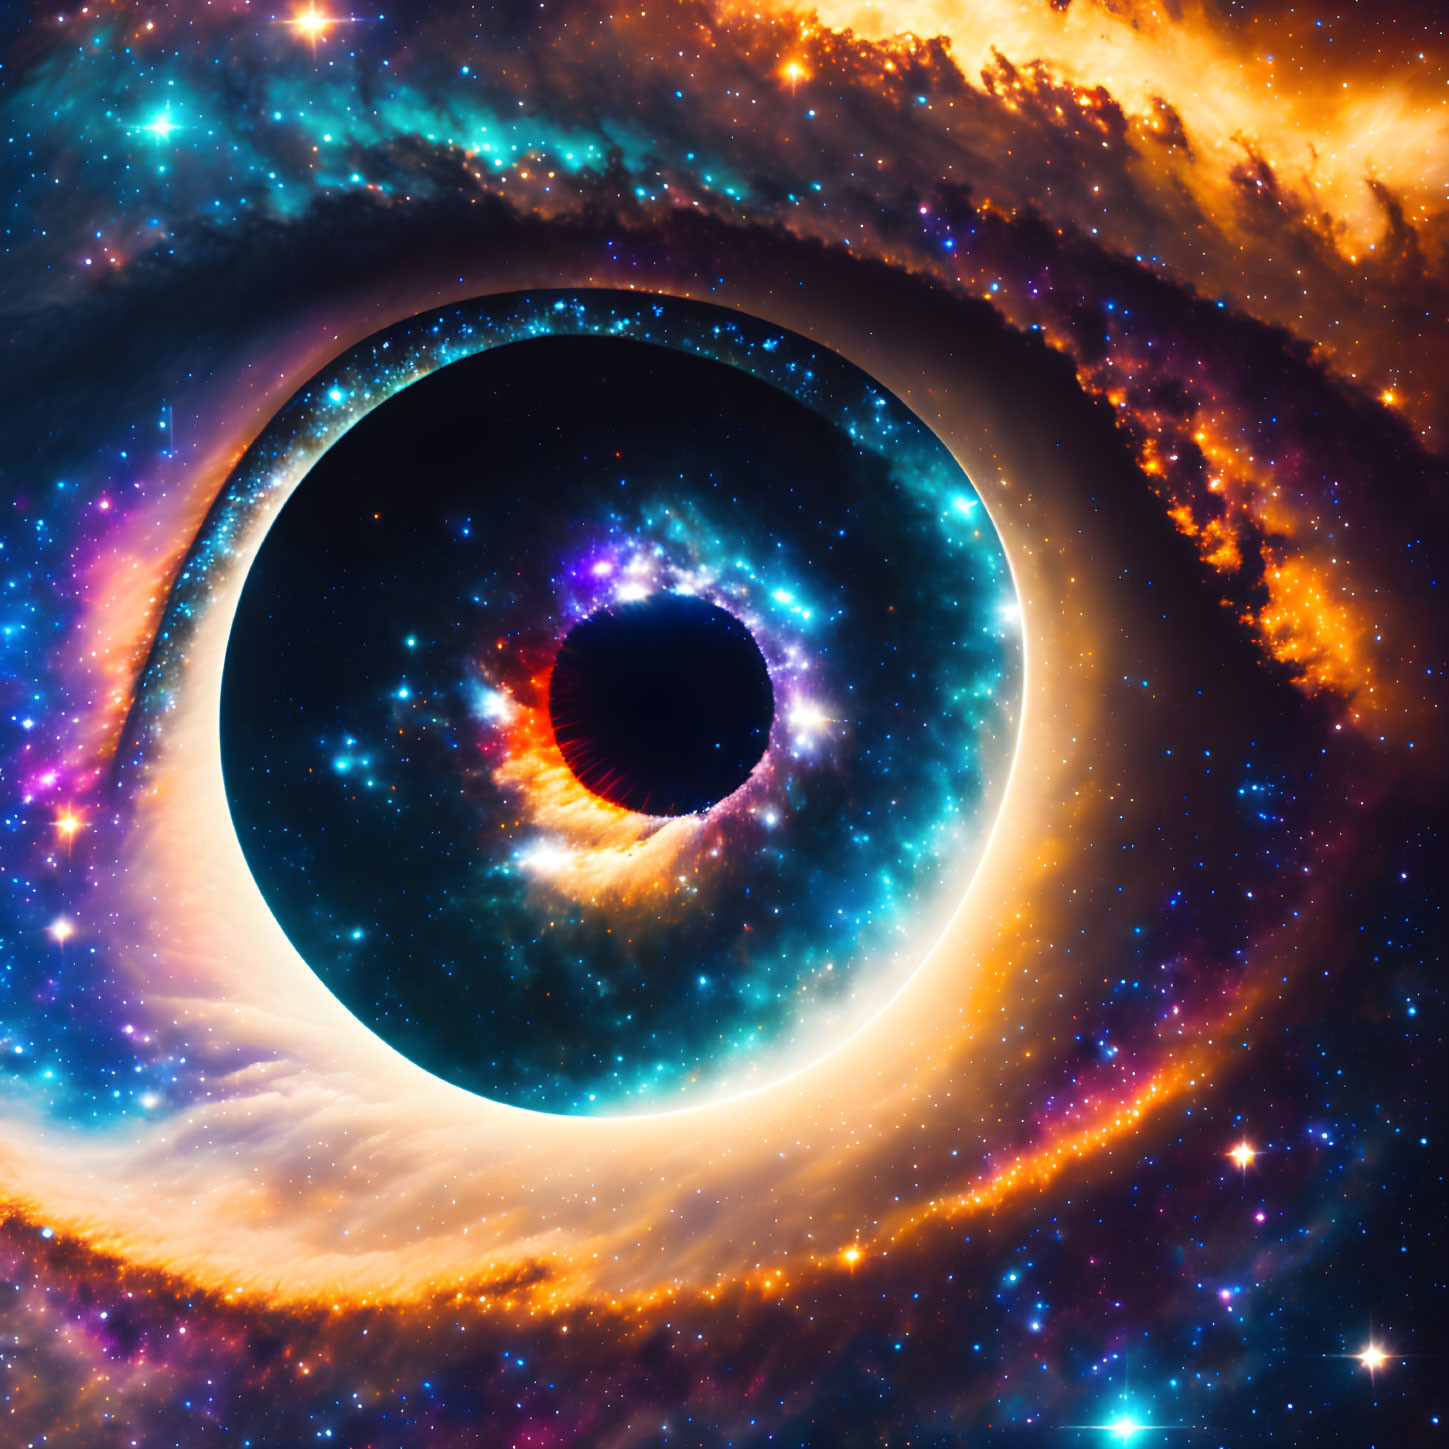 the eye as door to the universe